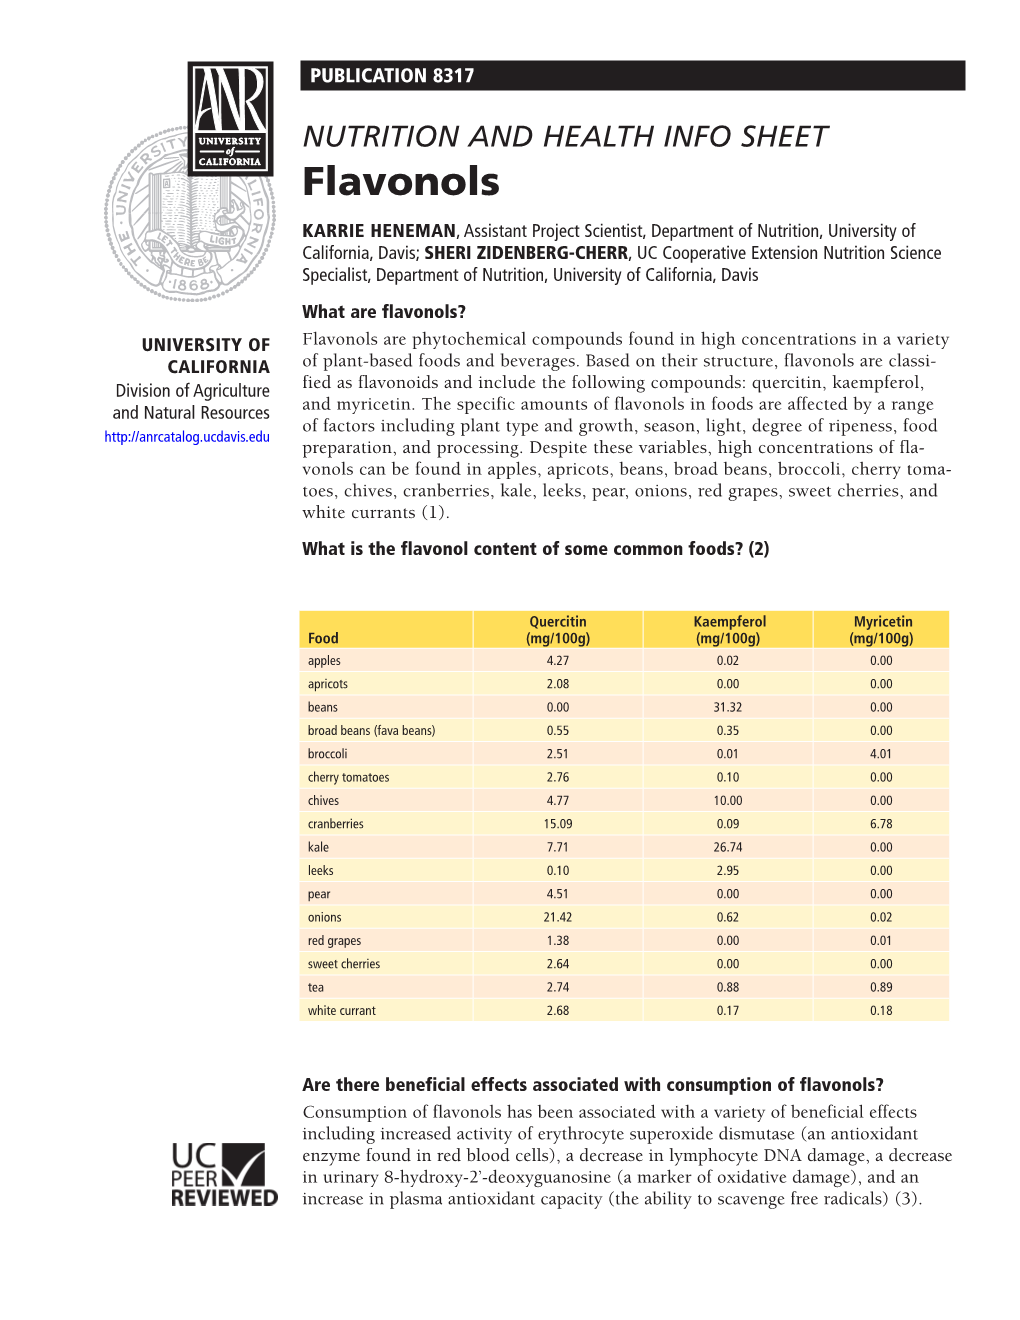 Nutrition and Health Info Sheet: Flavonols